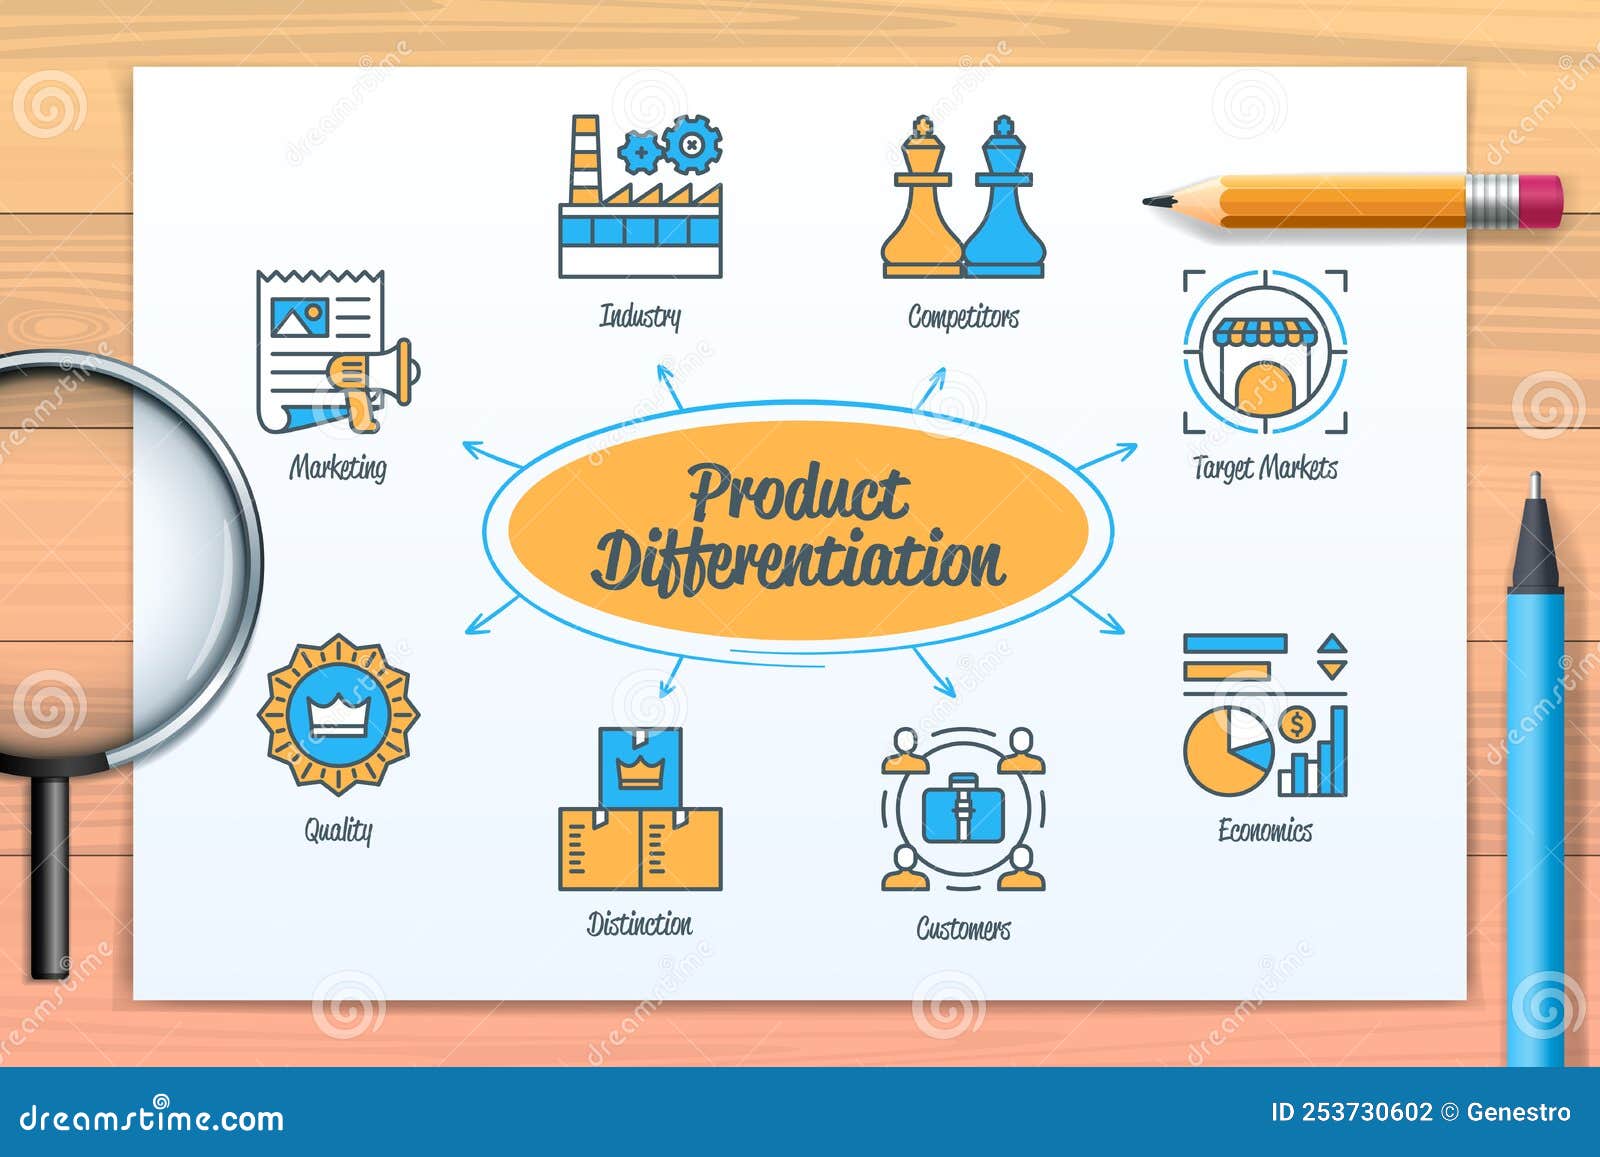 product differentiation chart with icons and keywords